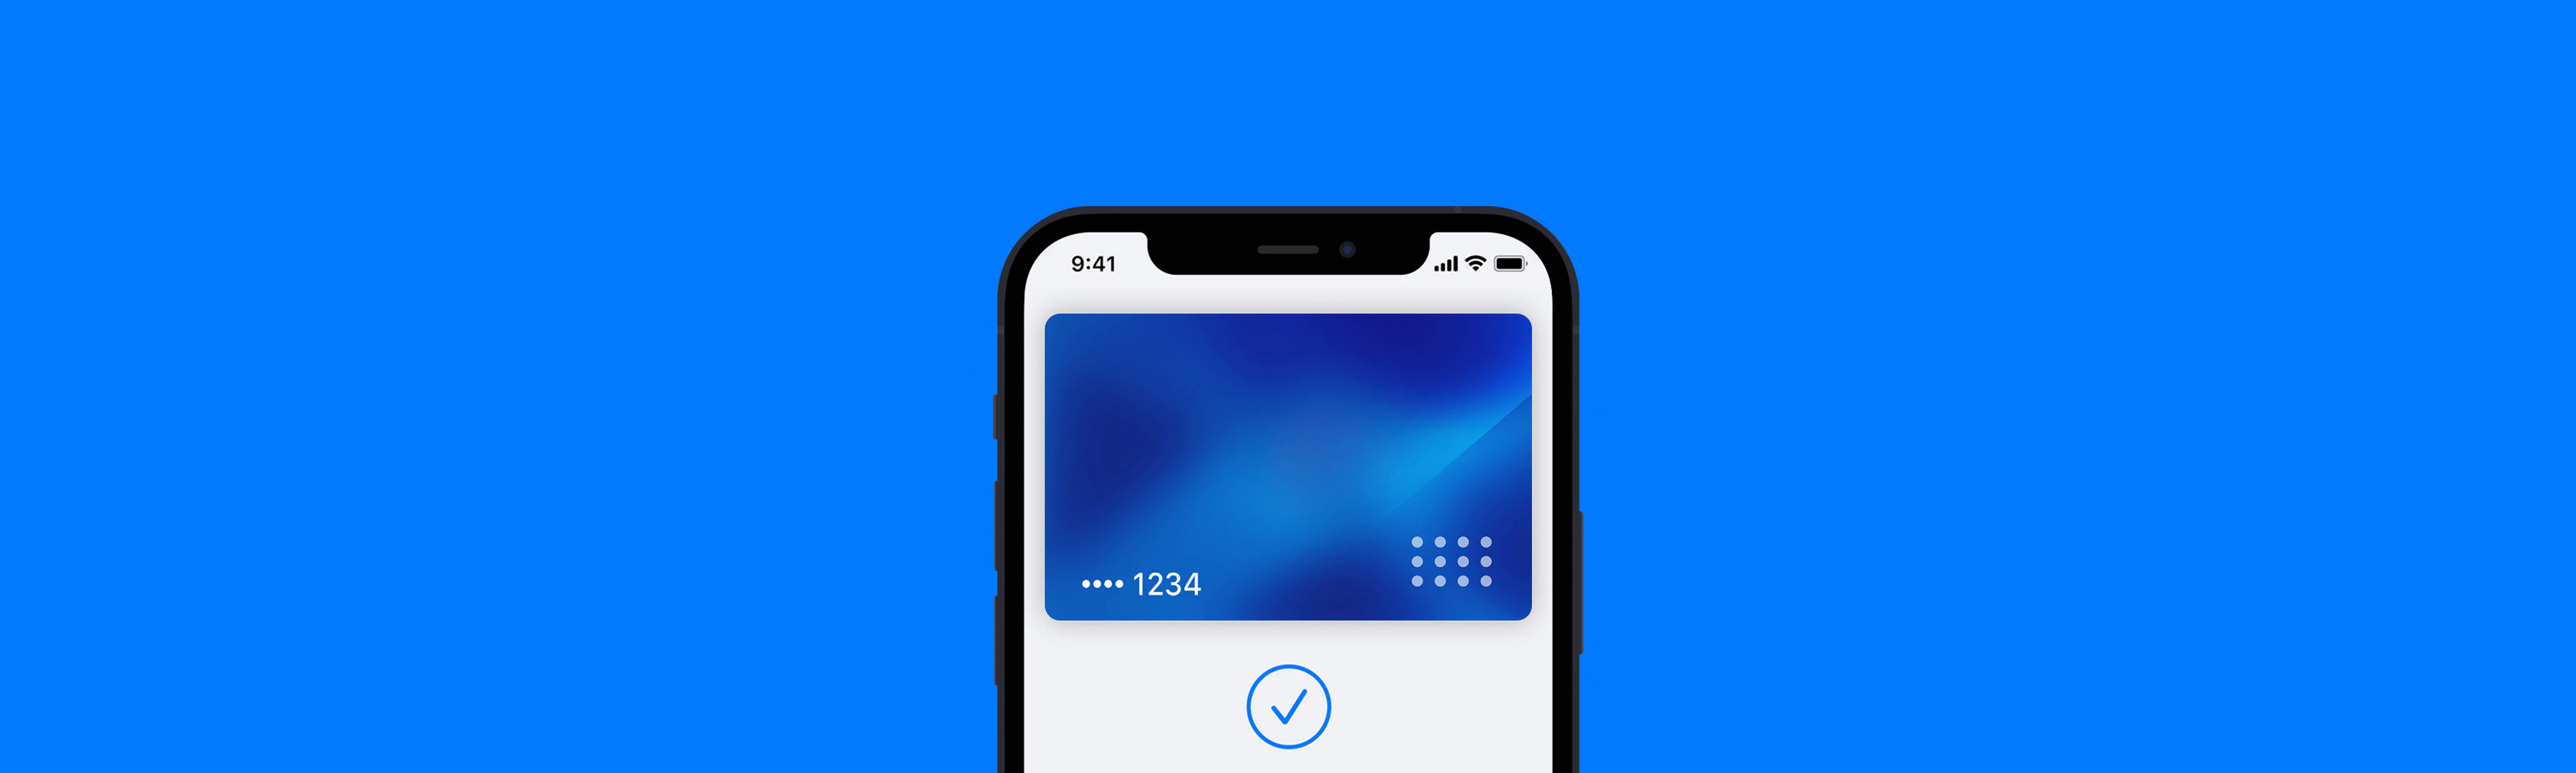 Apple Pay - Official Apple Support